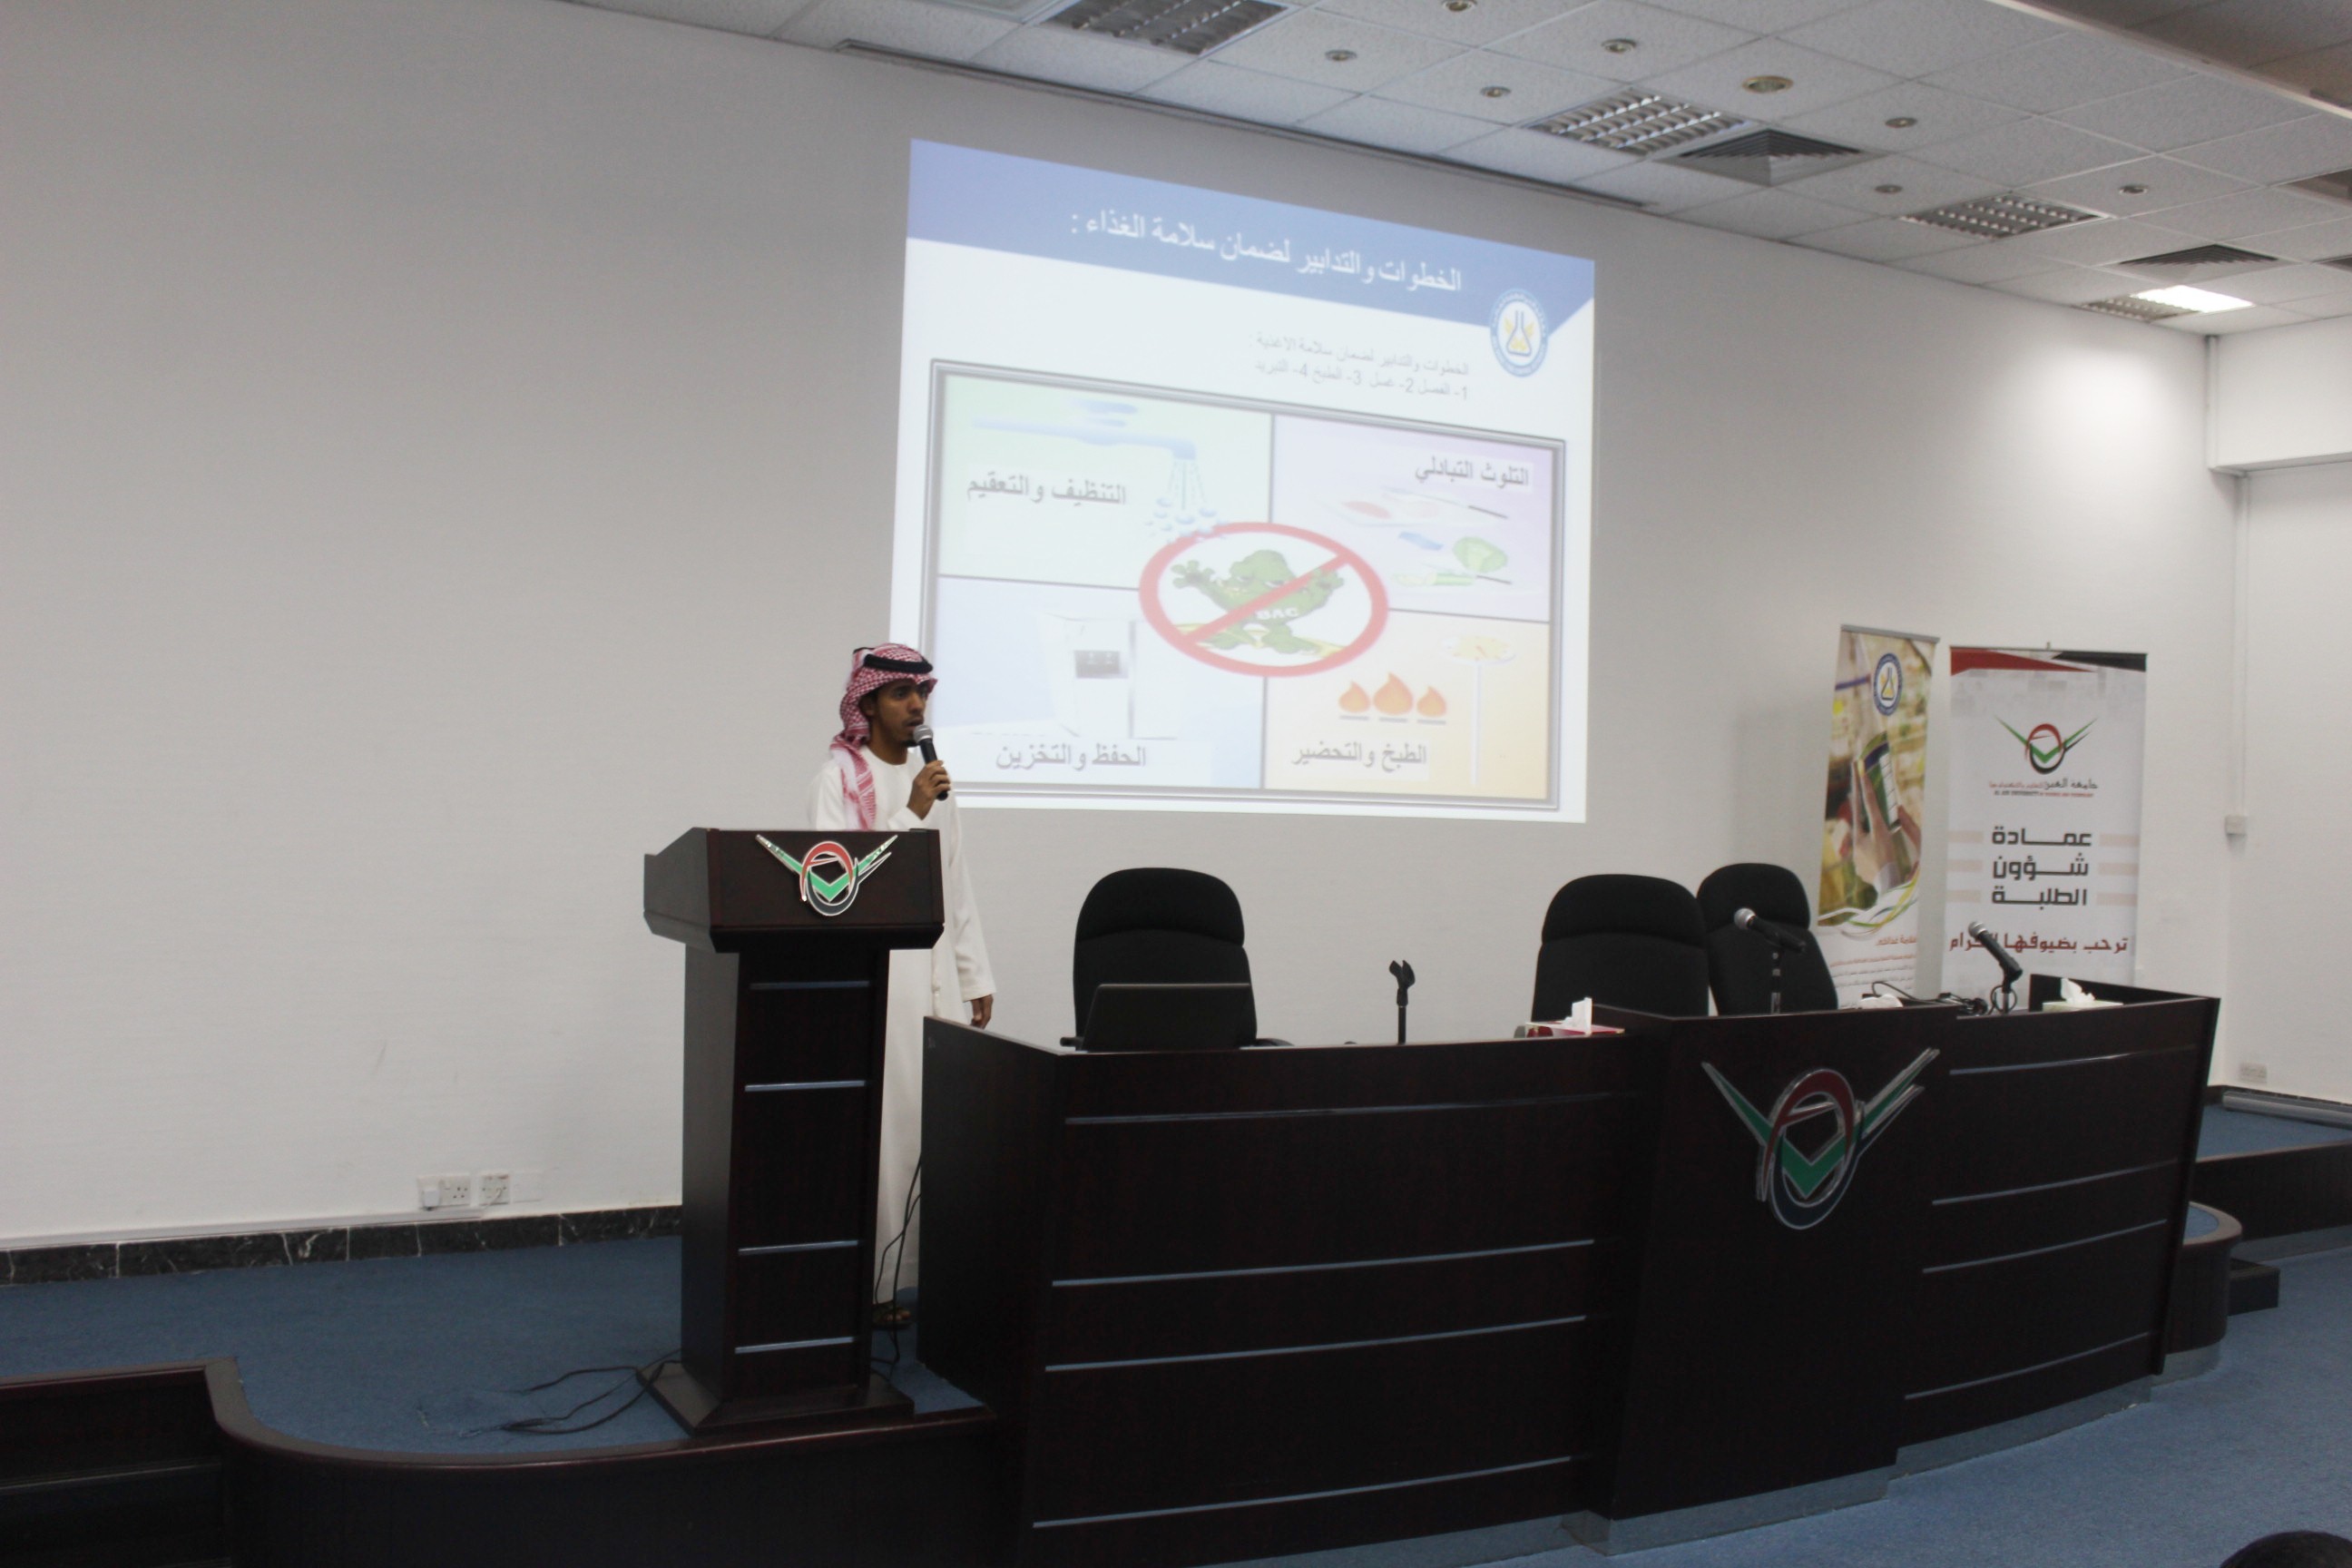 A lecture on "Food Safety" at Al Ain University